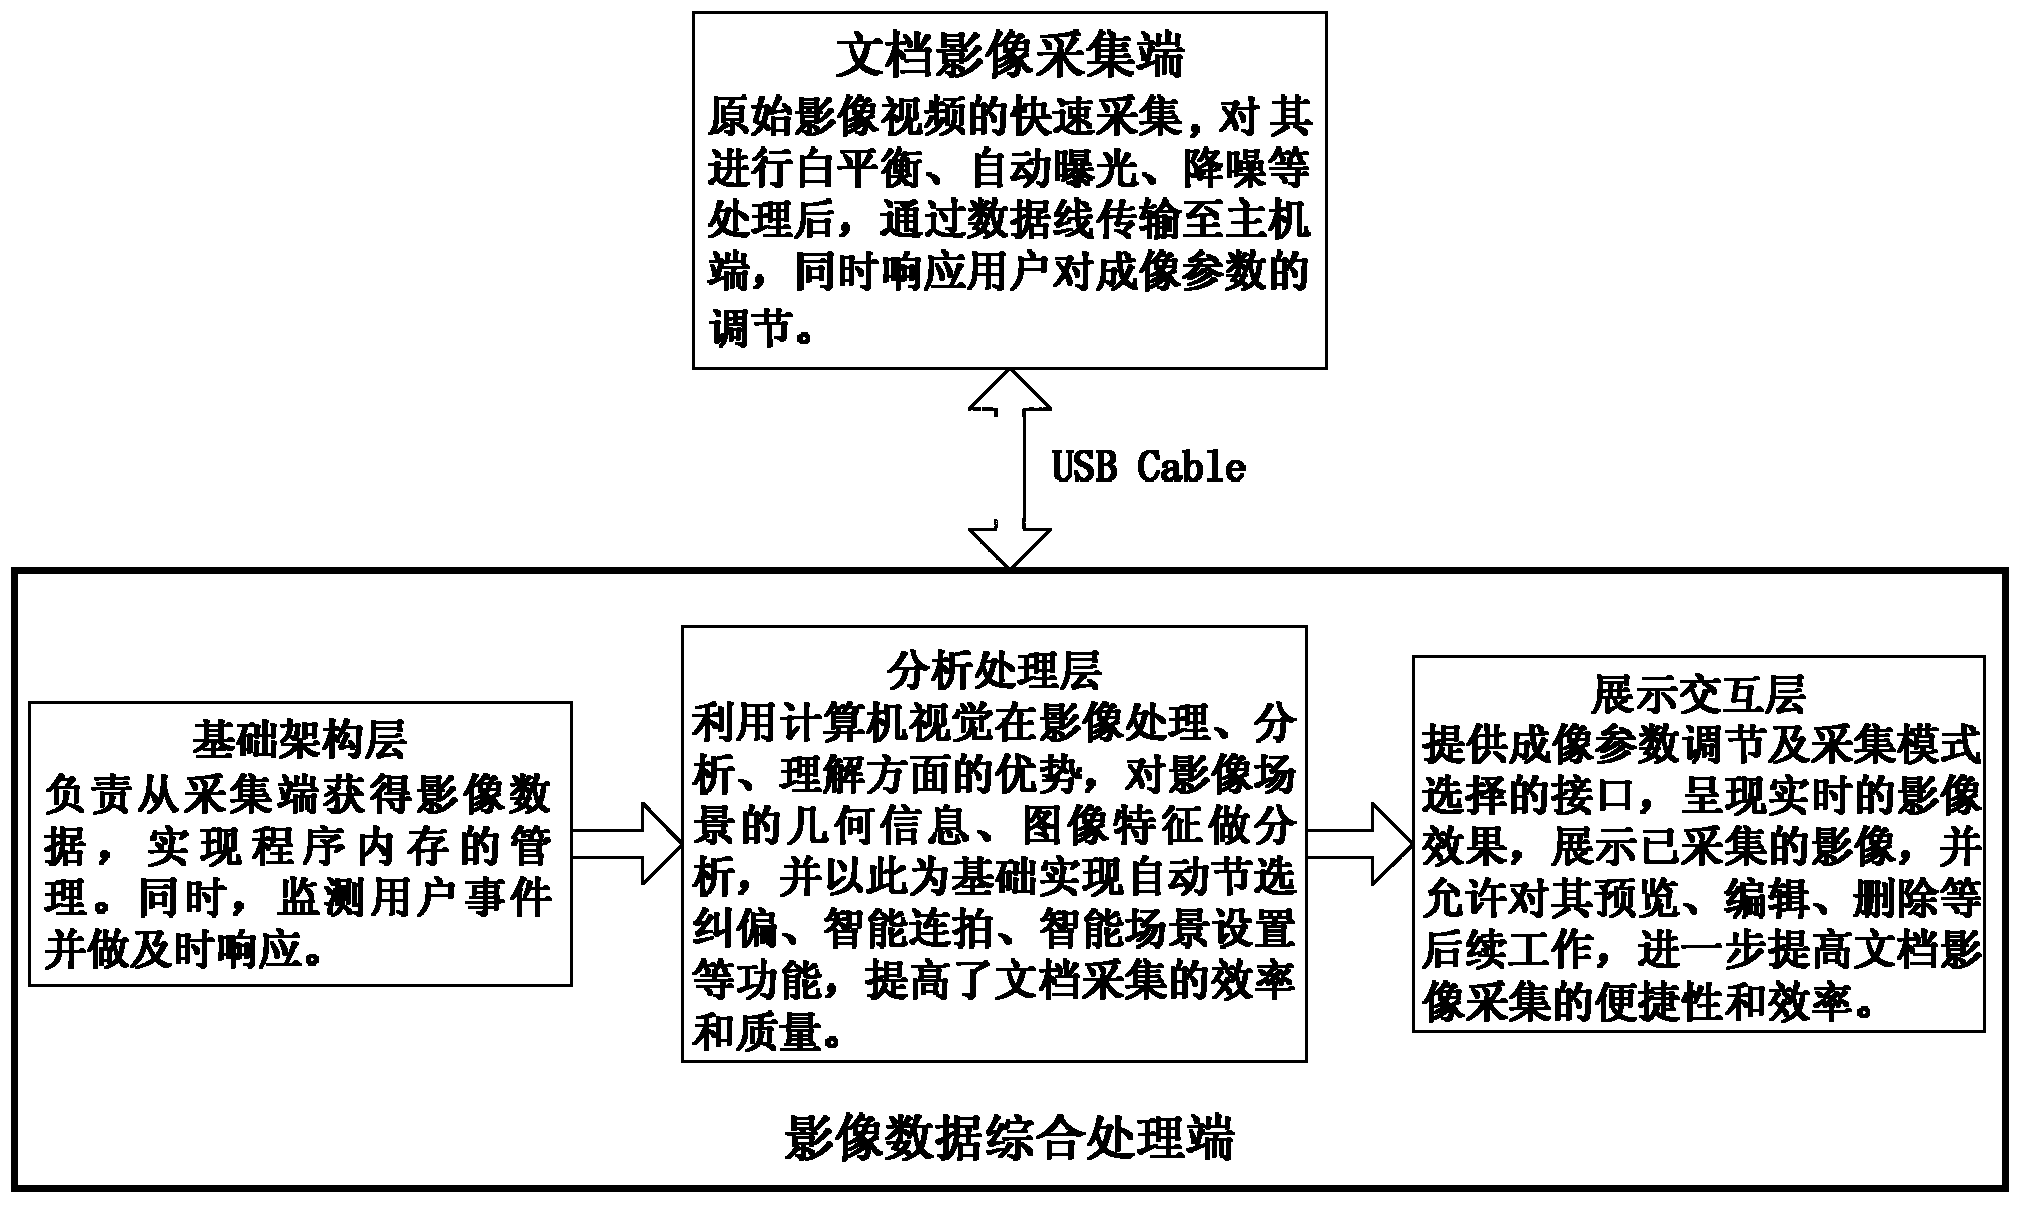 Portable intelligent document image collecting system and method based on computer vision